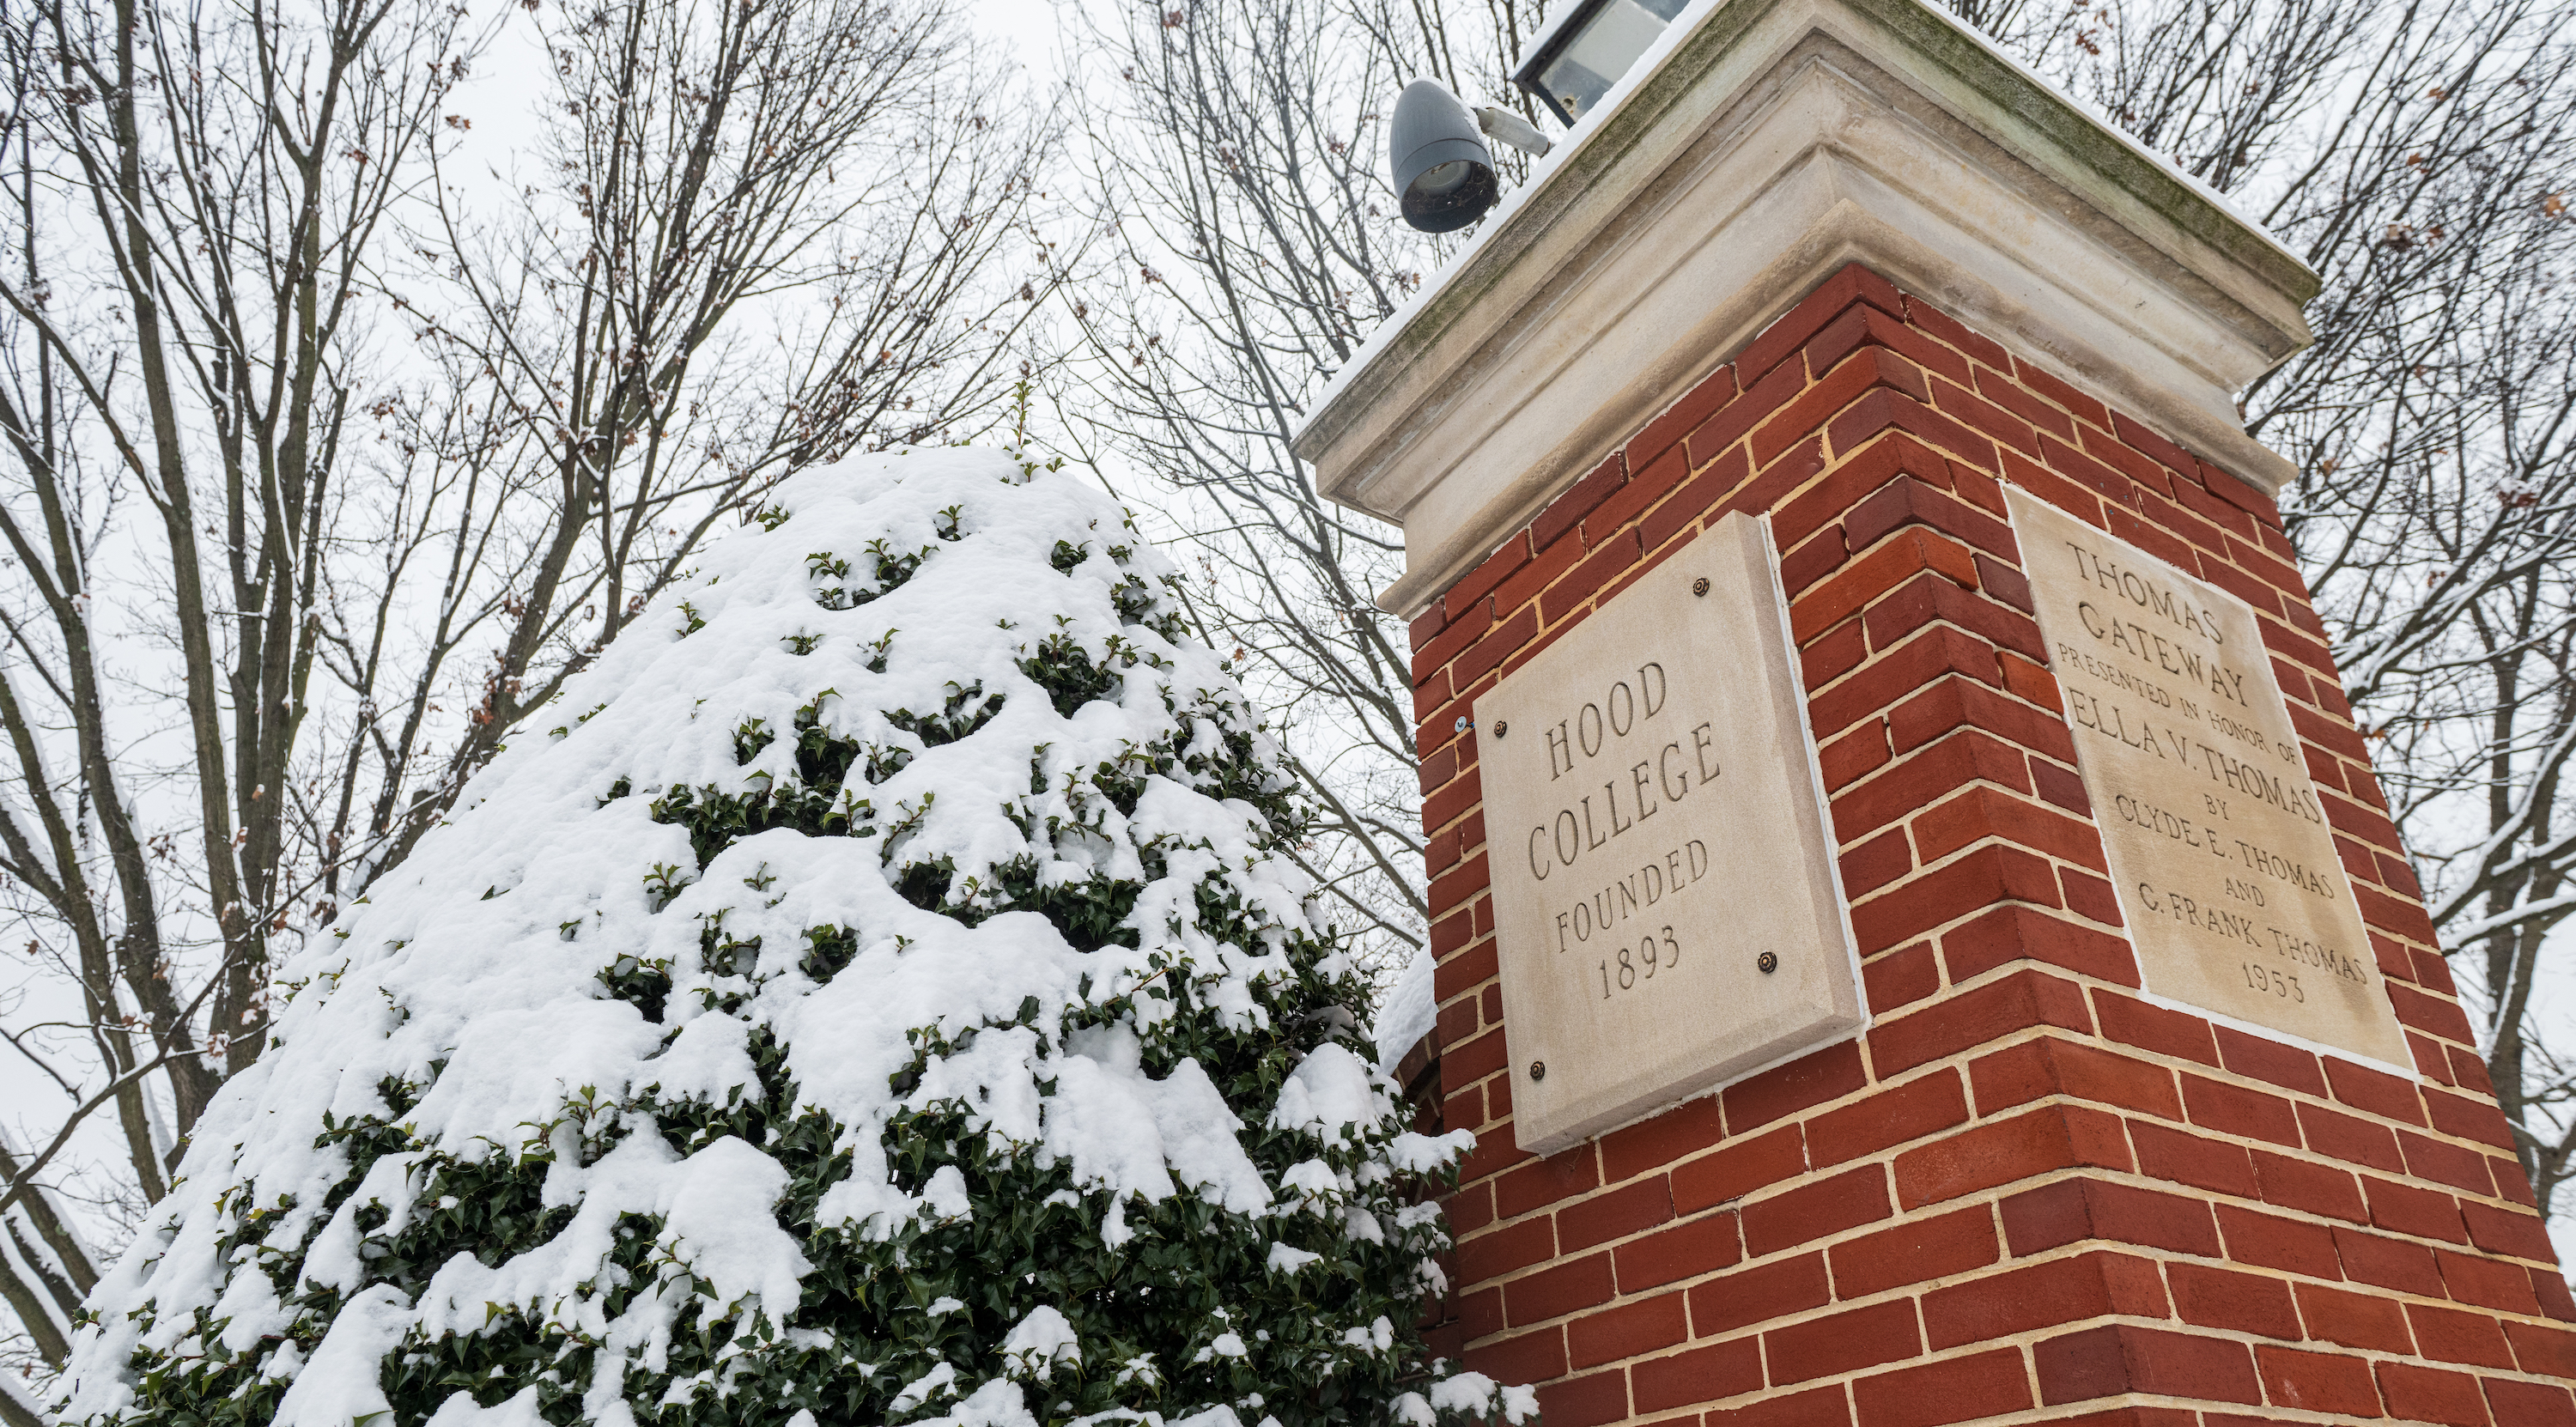 Hood College's front entrance during a snowfall in January